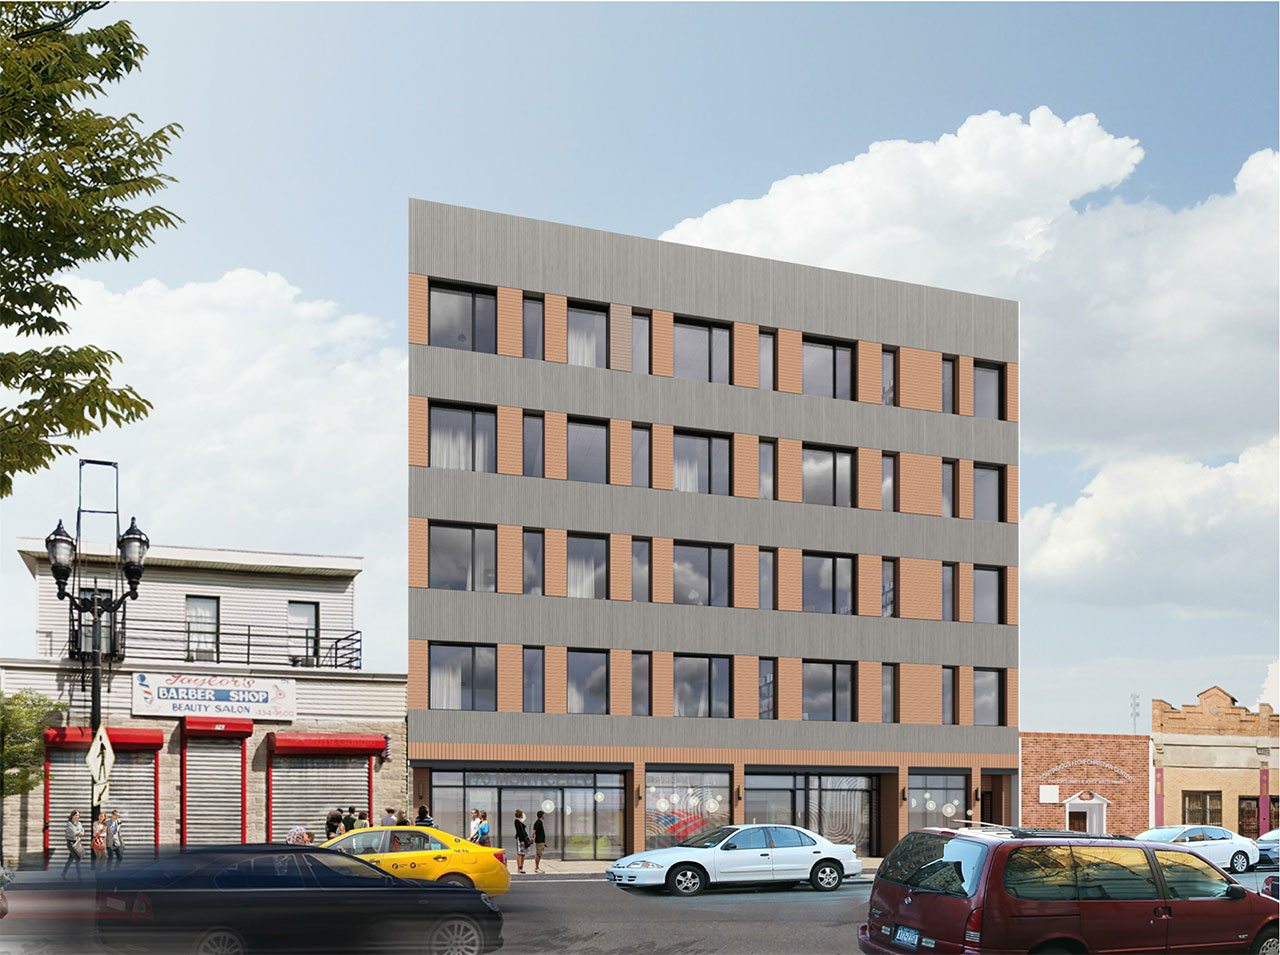 170 174 Monticello Ave Jersey City Rendering